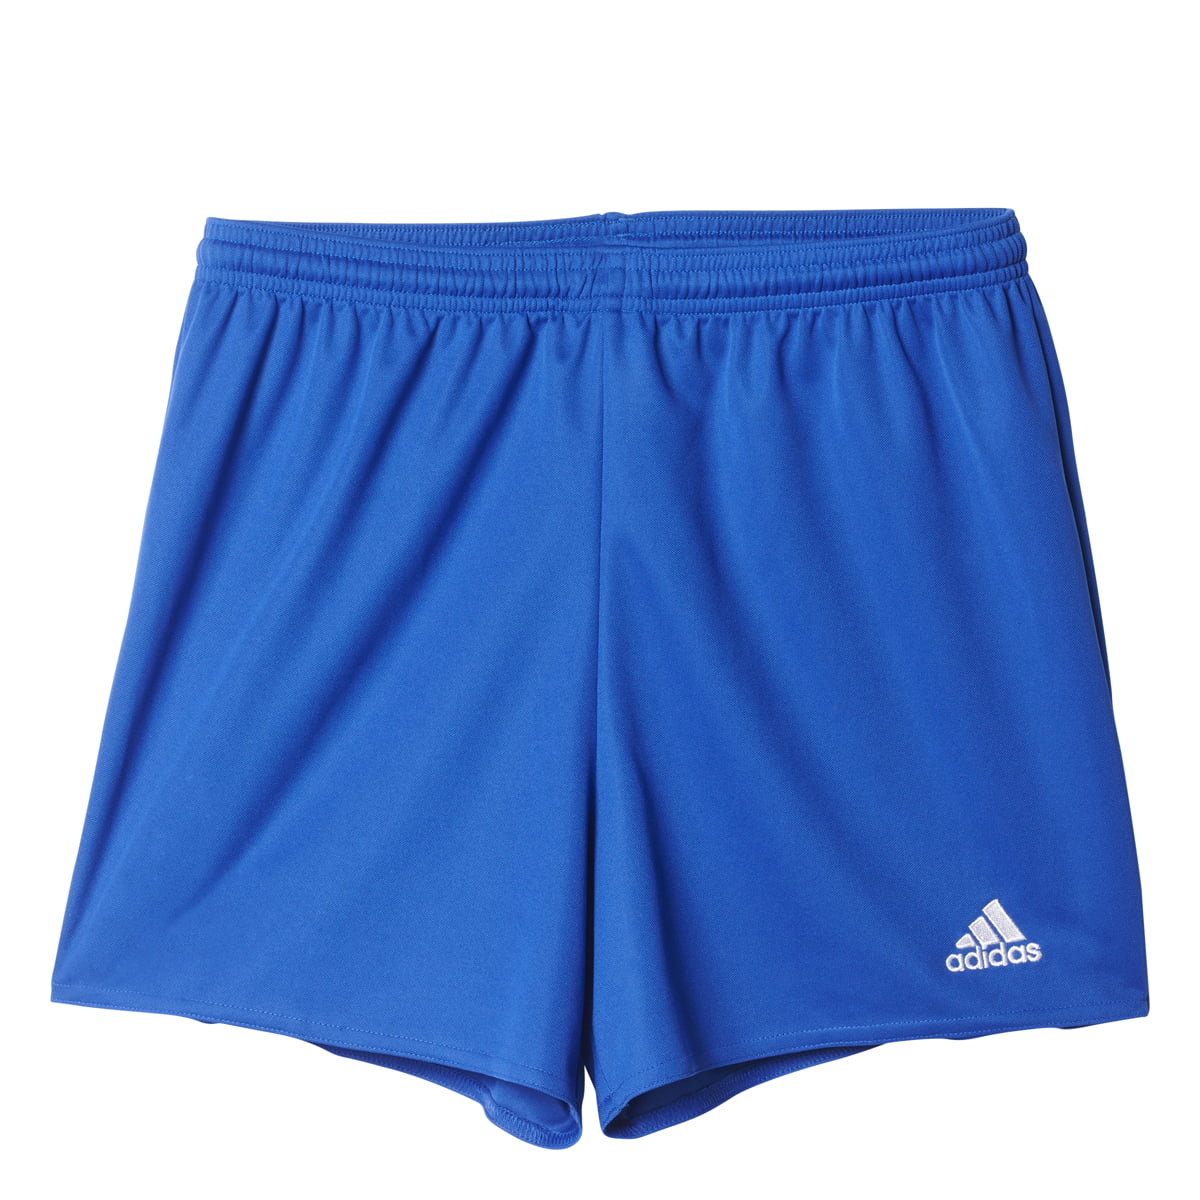 Adidas Women's Parma 16 Soccer Shorts Adidas - Ships Directly From ...